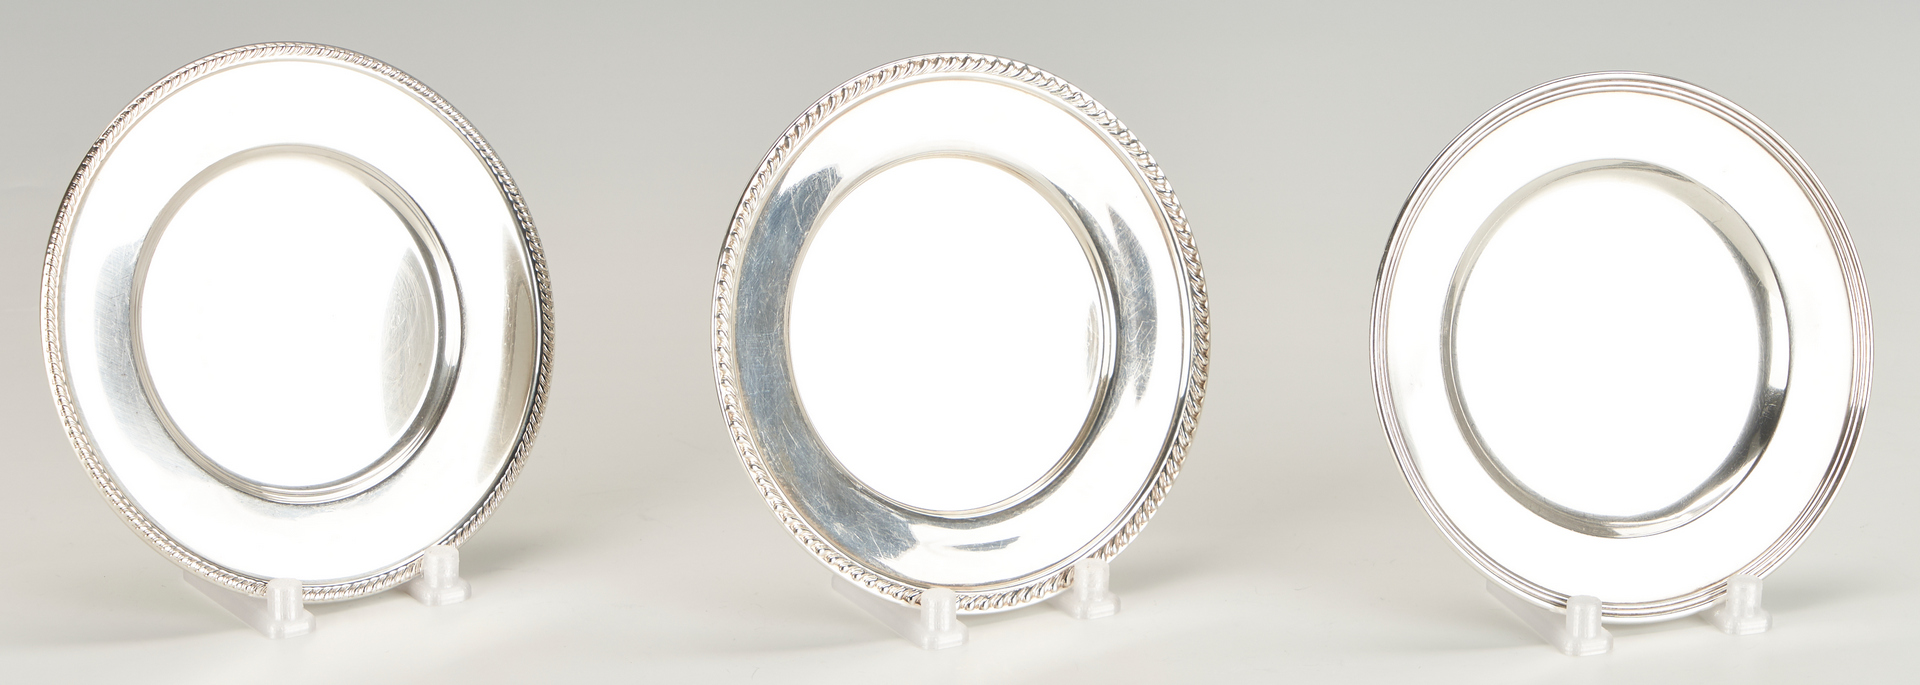 Lot 1227: 13 Sterling Silver Bread Plates, Fina and Amston